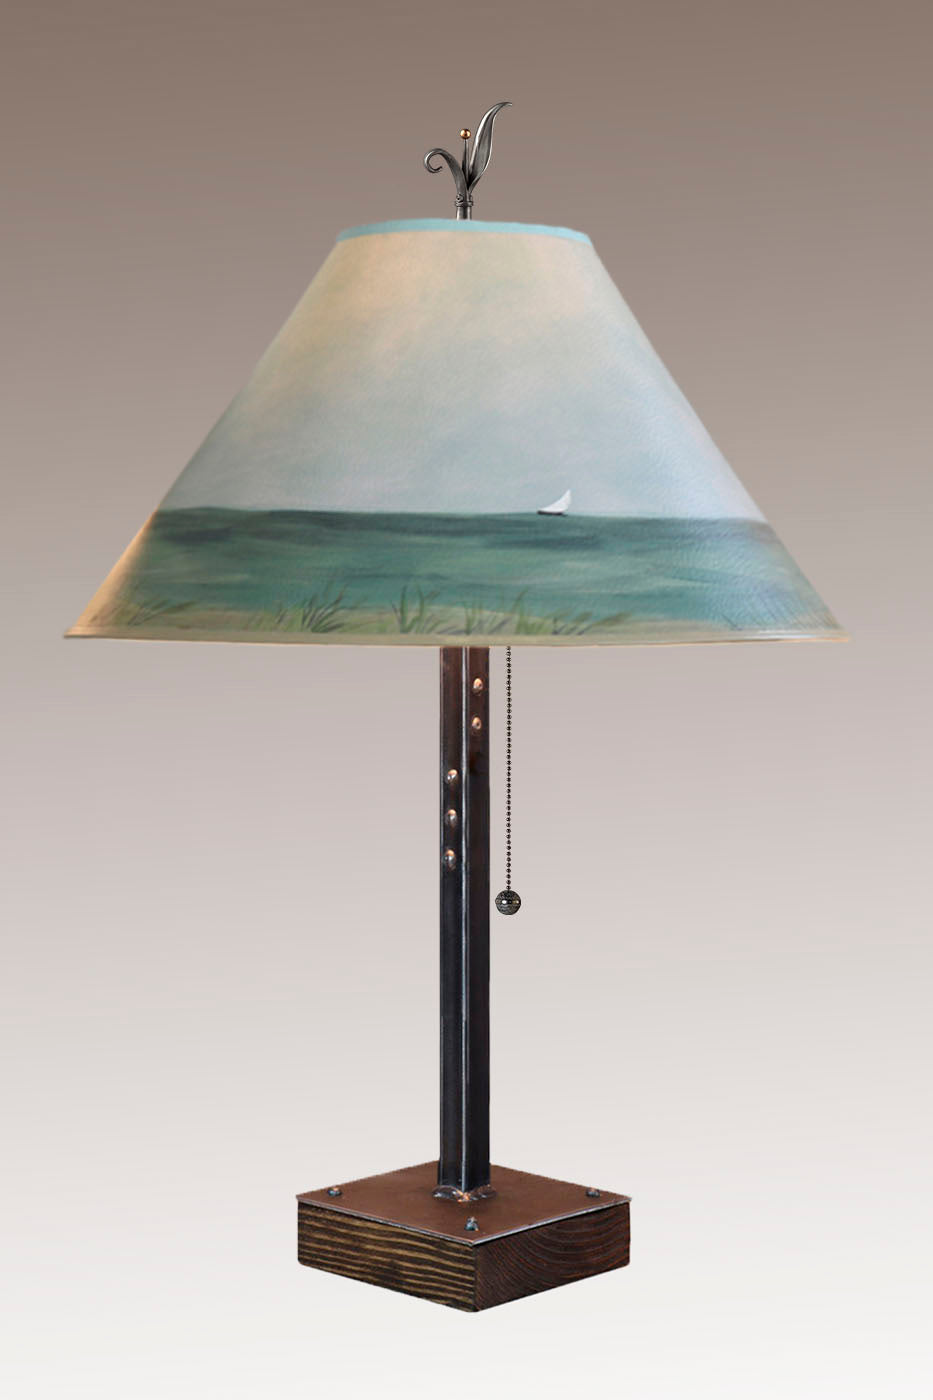 Steel Table Lamp on Wood with Large Conical Shade in Shore